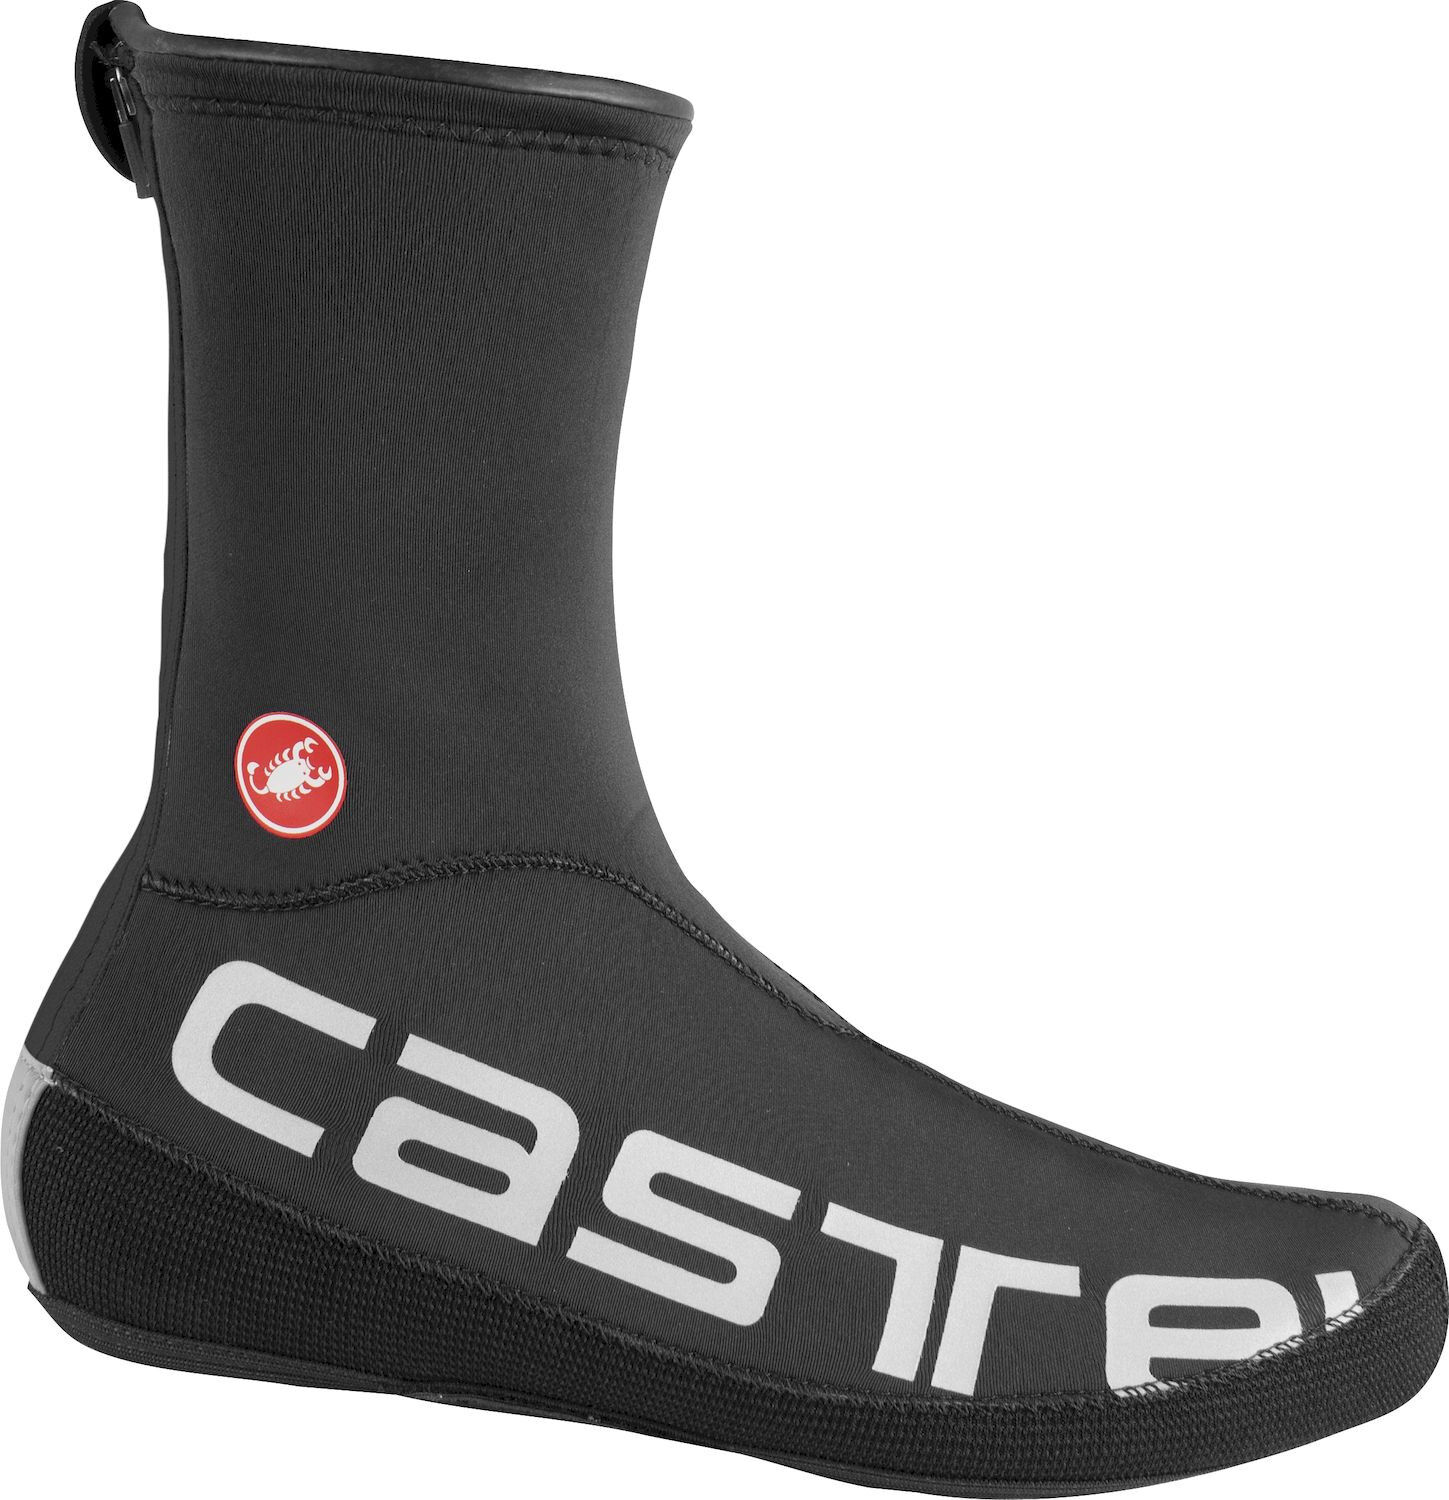 Castelli Diluvio Ul Shoecover - Cycling overshoes